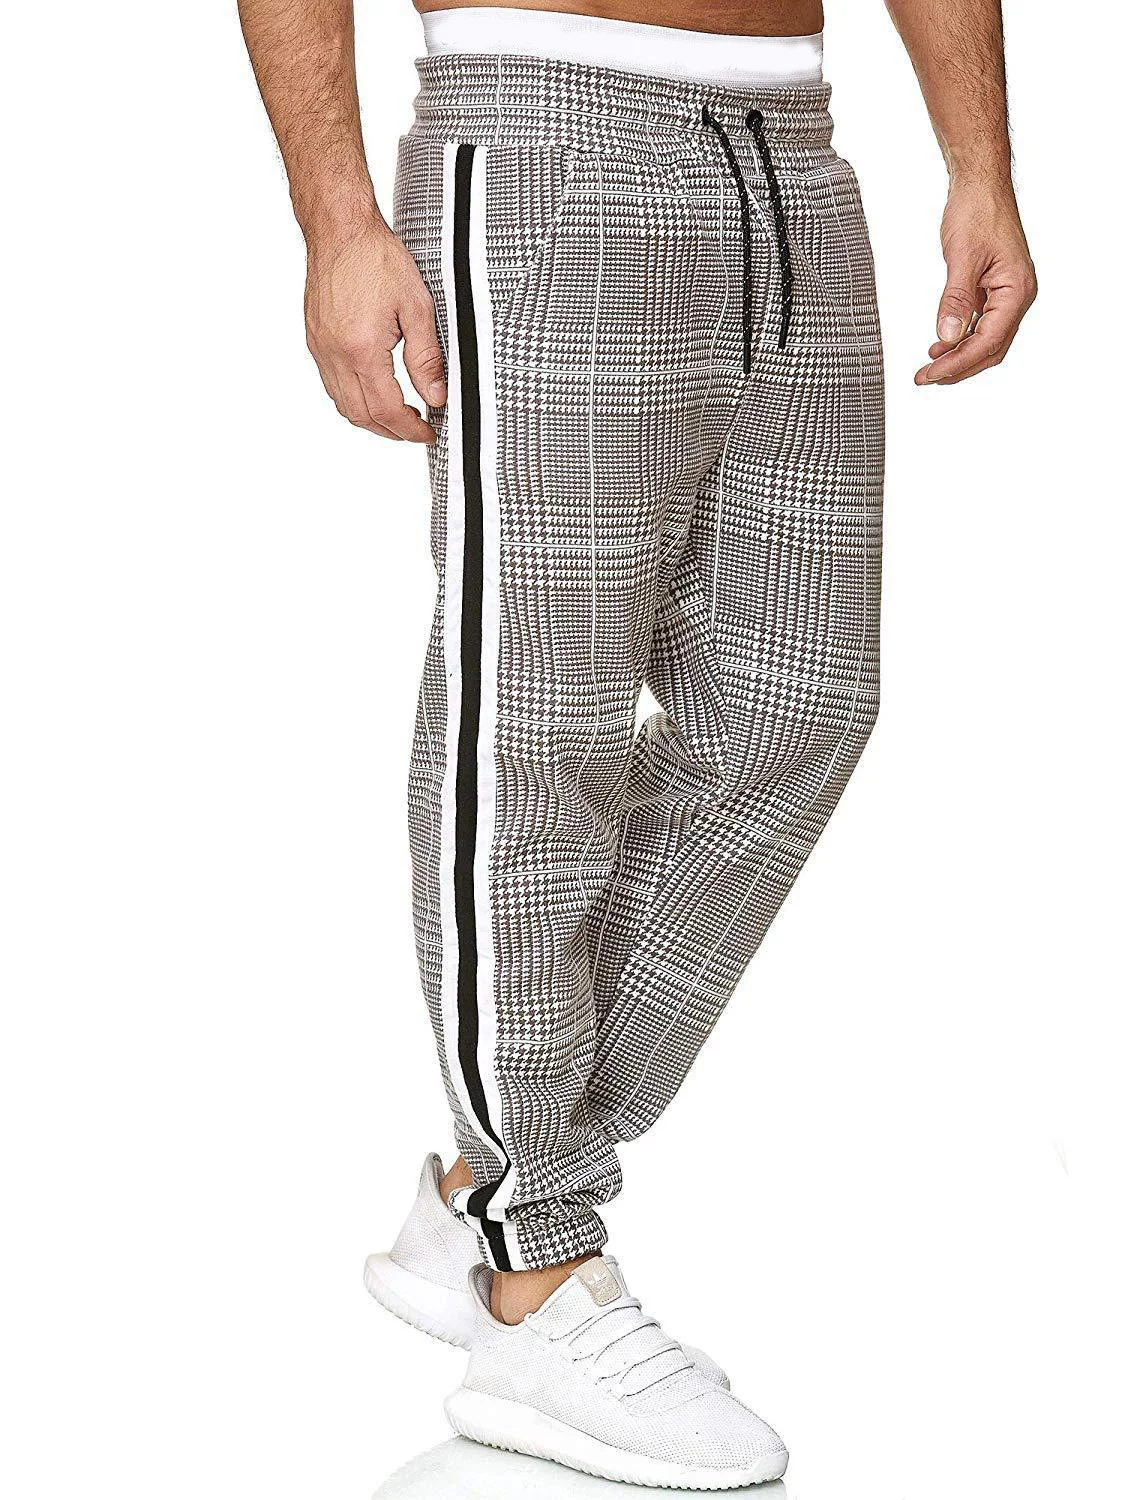 Casual Plaid Sweatpants for sports2